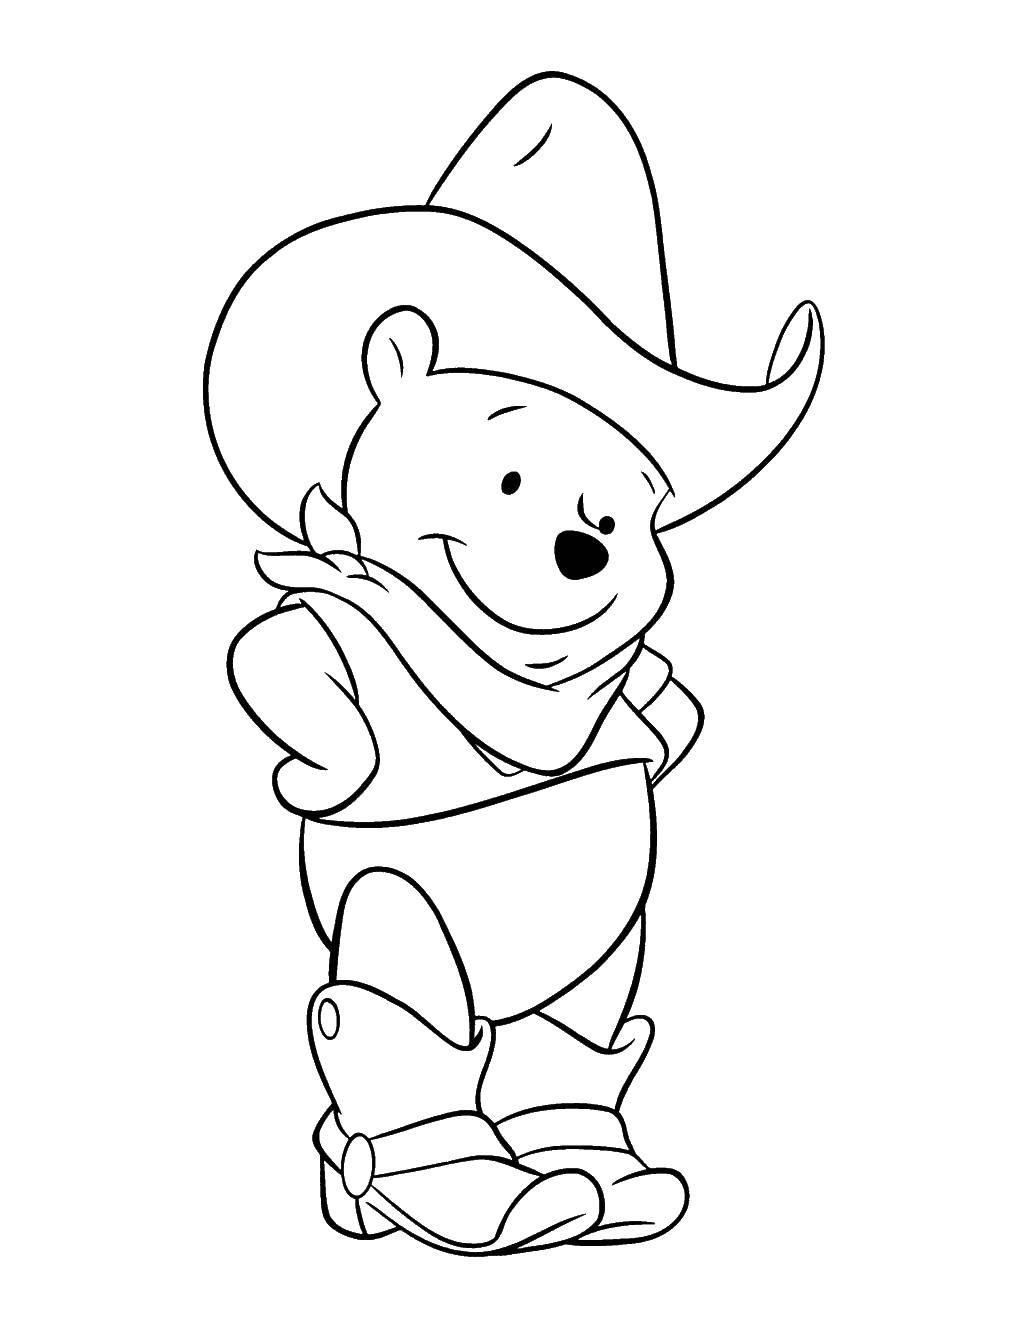 Coloring Winnie the Pooh cowboy. Category cartoons. Tags:  Disney cartoons, cowboy, Winnie the Pooh.